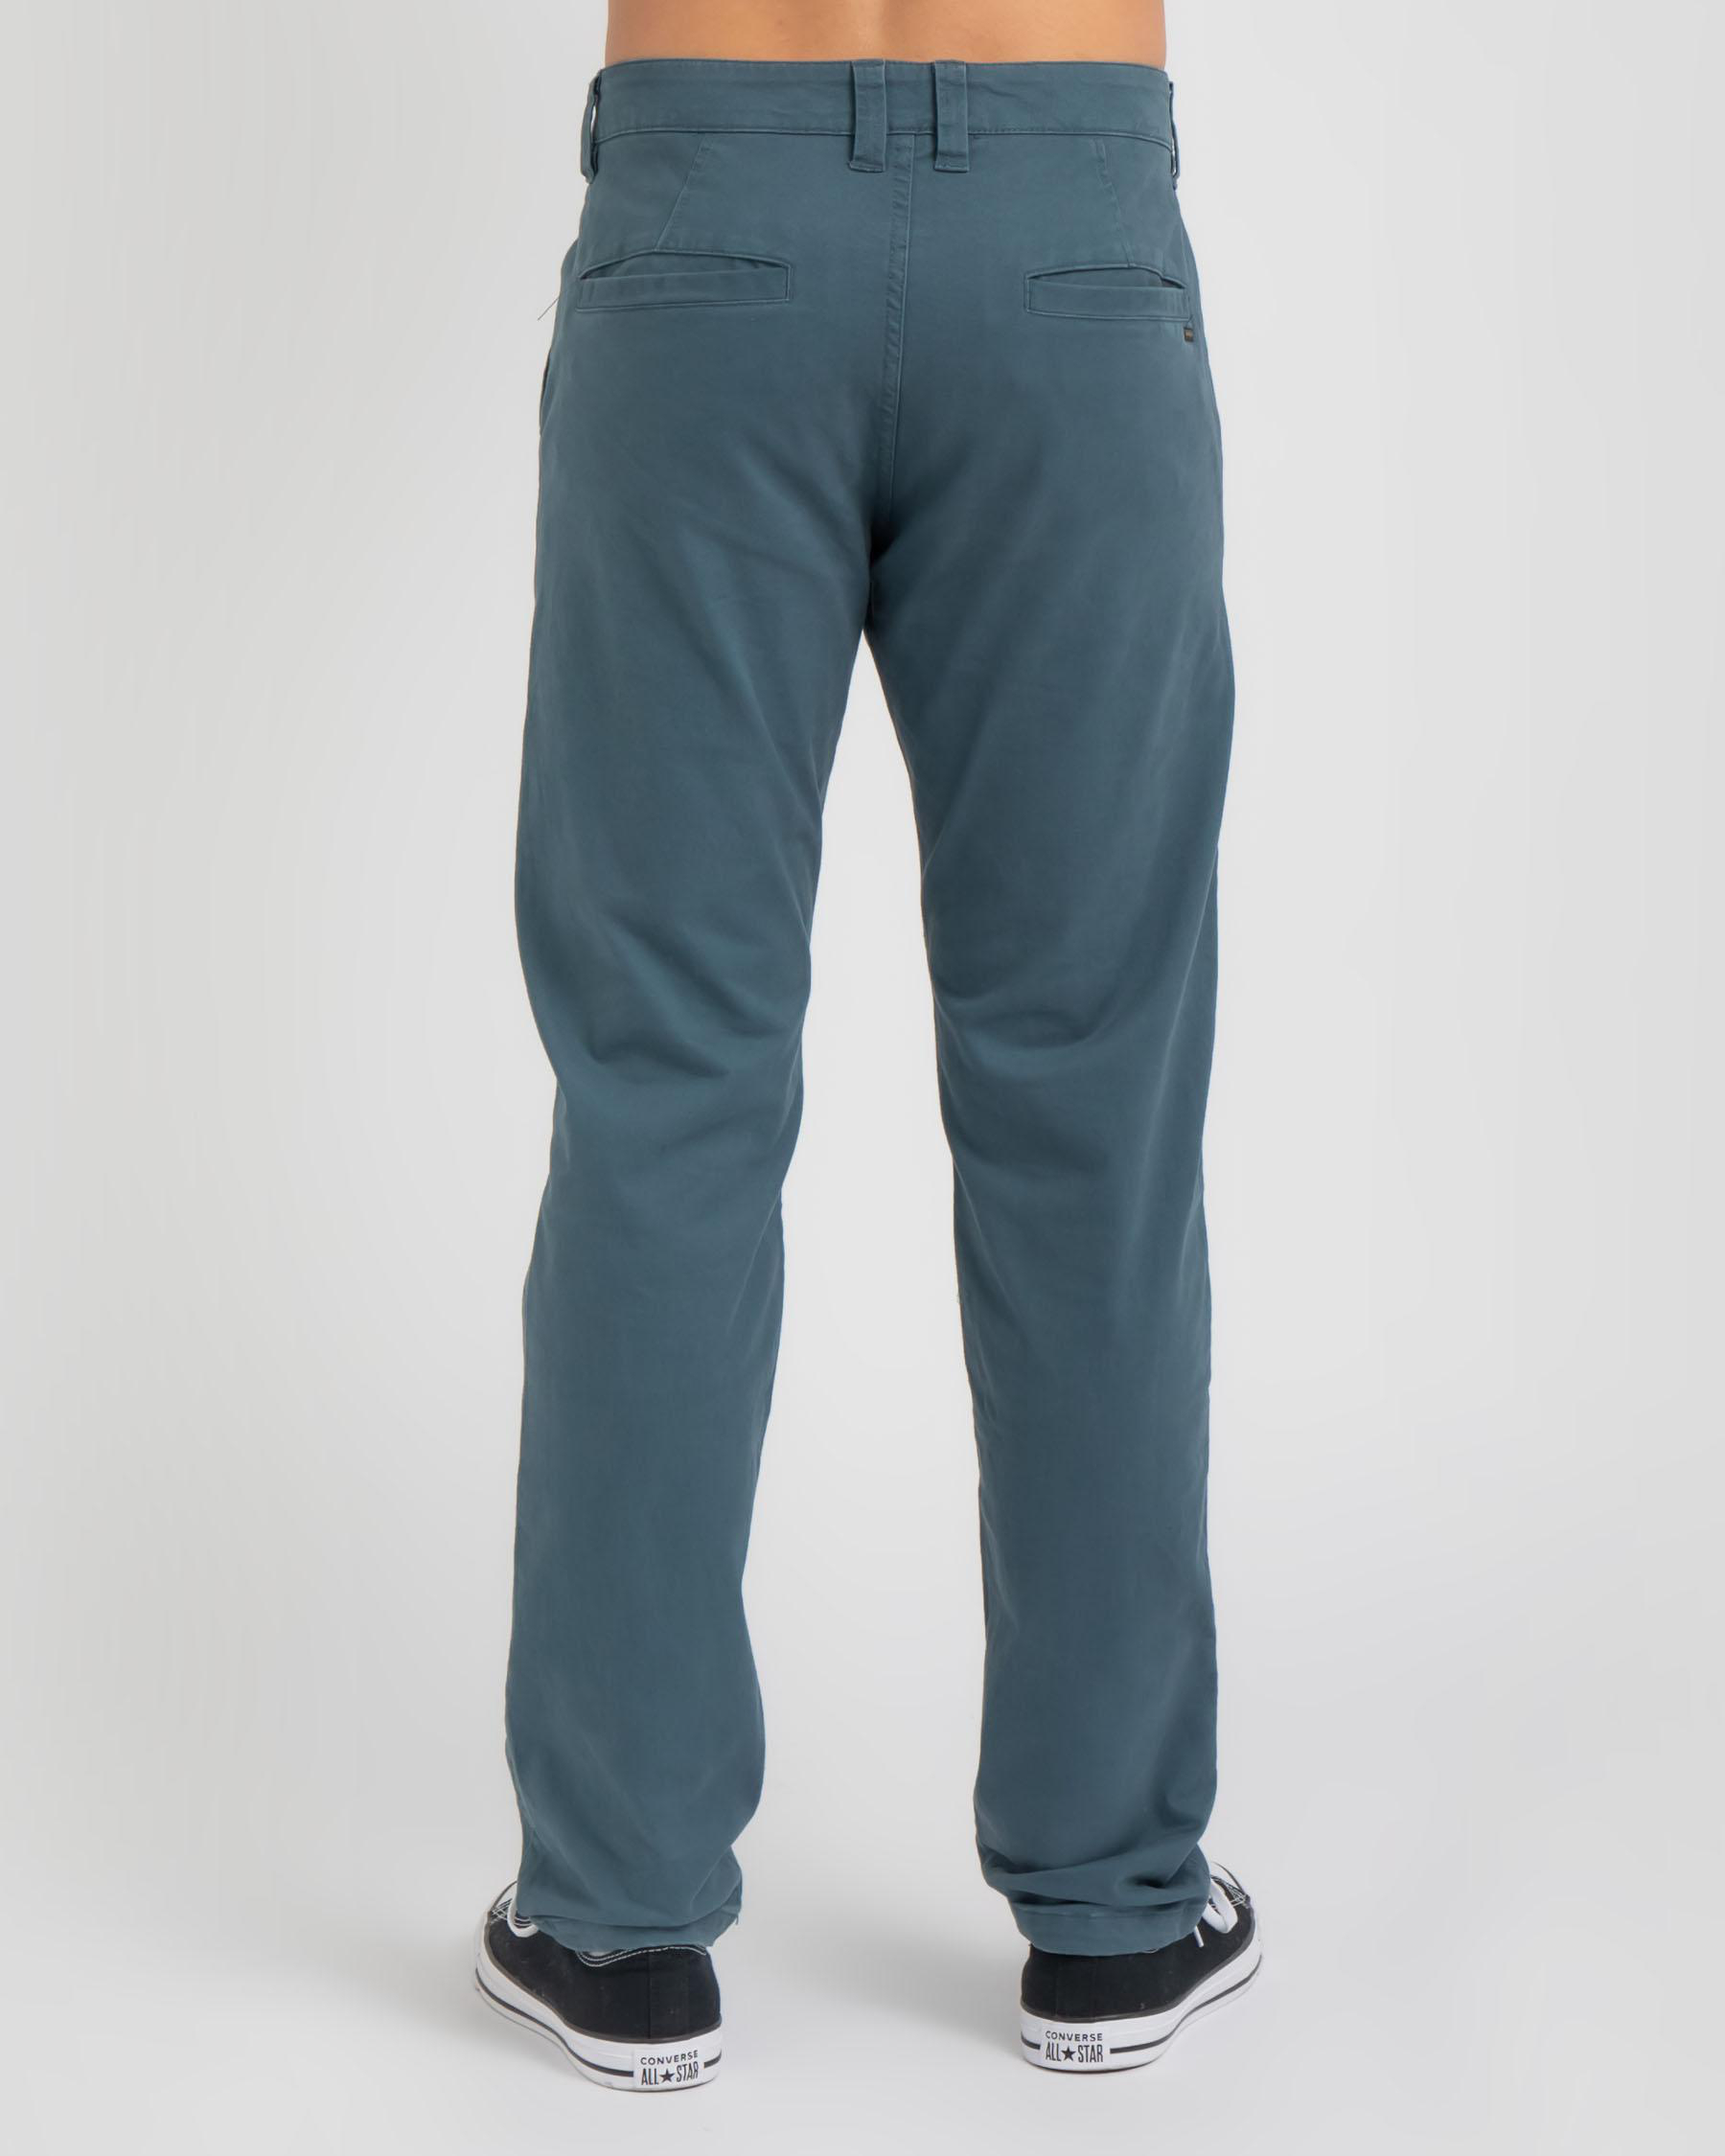 Rip Curl Epic Pants In Wny - FREE* Shipping & Easy Returns - City Beach ...